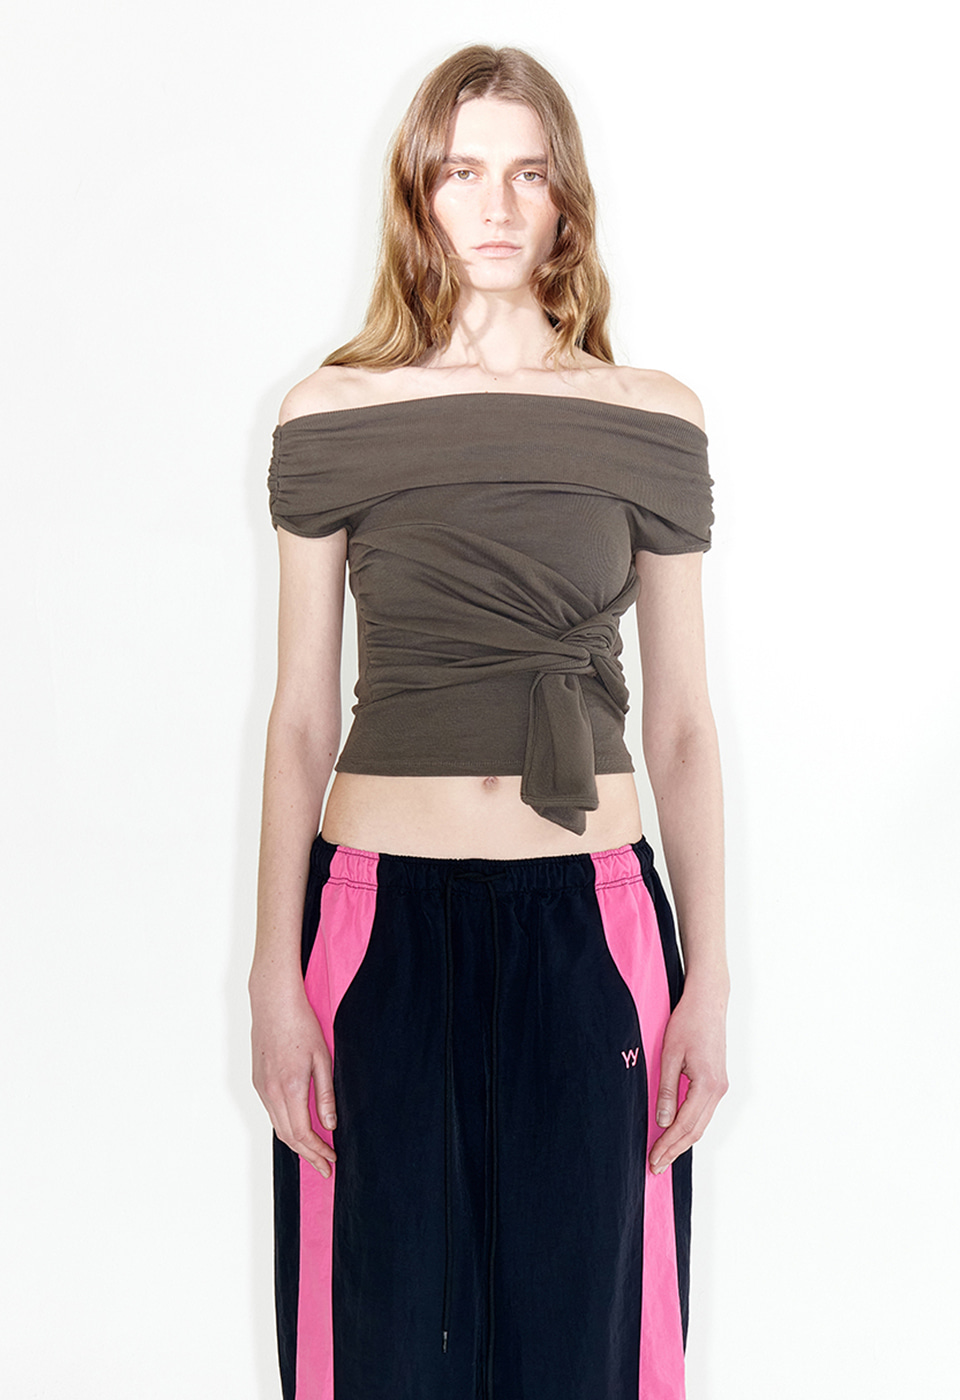 [5/7 DELIVERY] KNOTTED OFF-SHOULDER TOP, BROWN